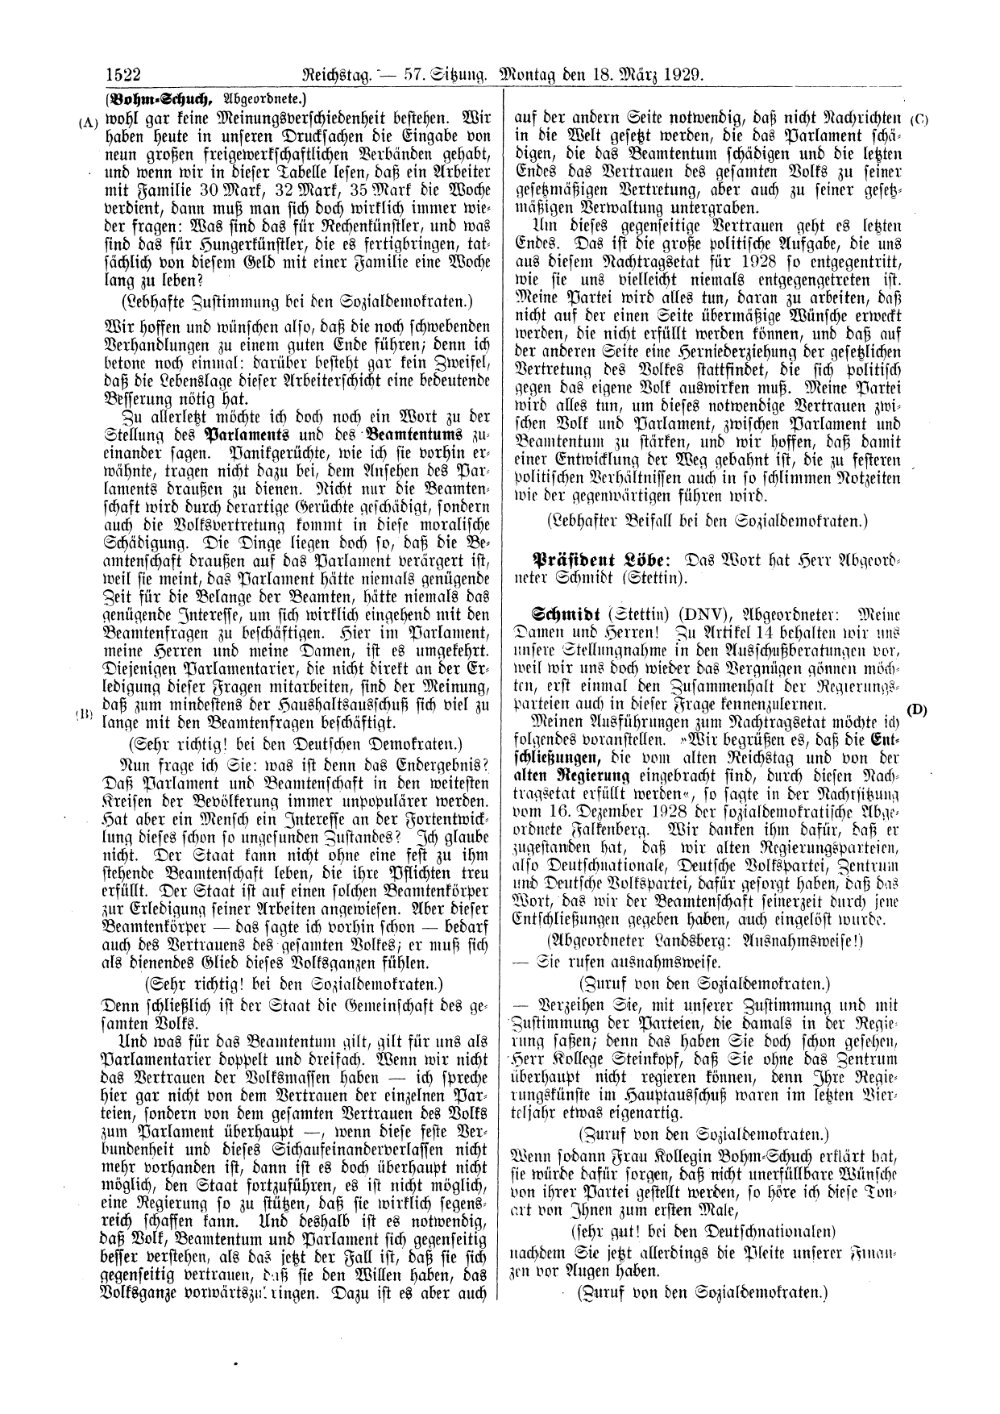 Scan of page 1522